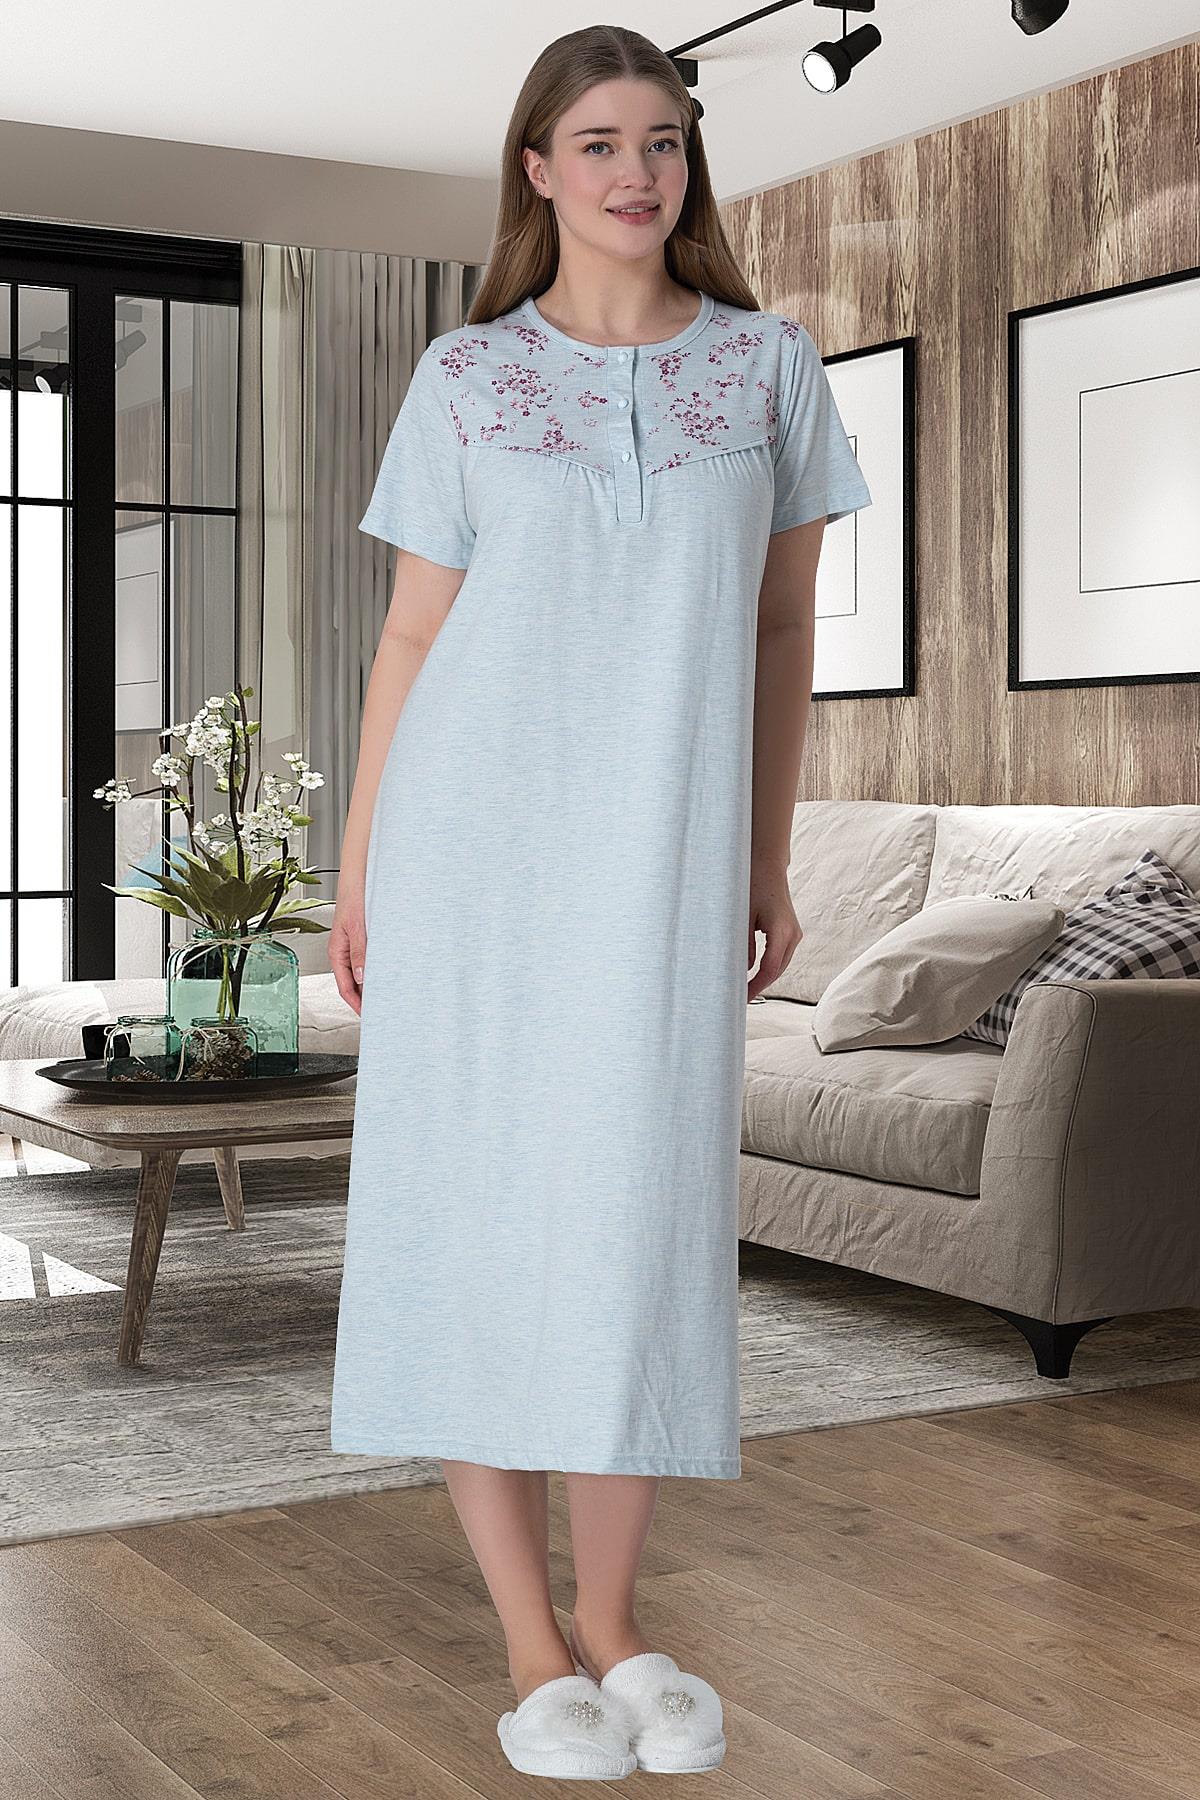 Shopymommy 6027 Patterned Plus Size Maternity & Nursing Nightgown Blue